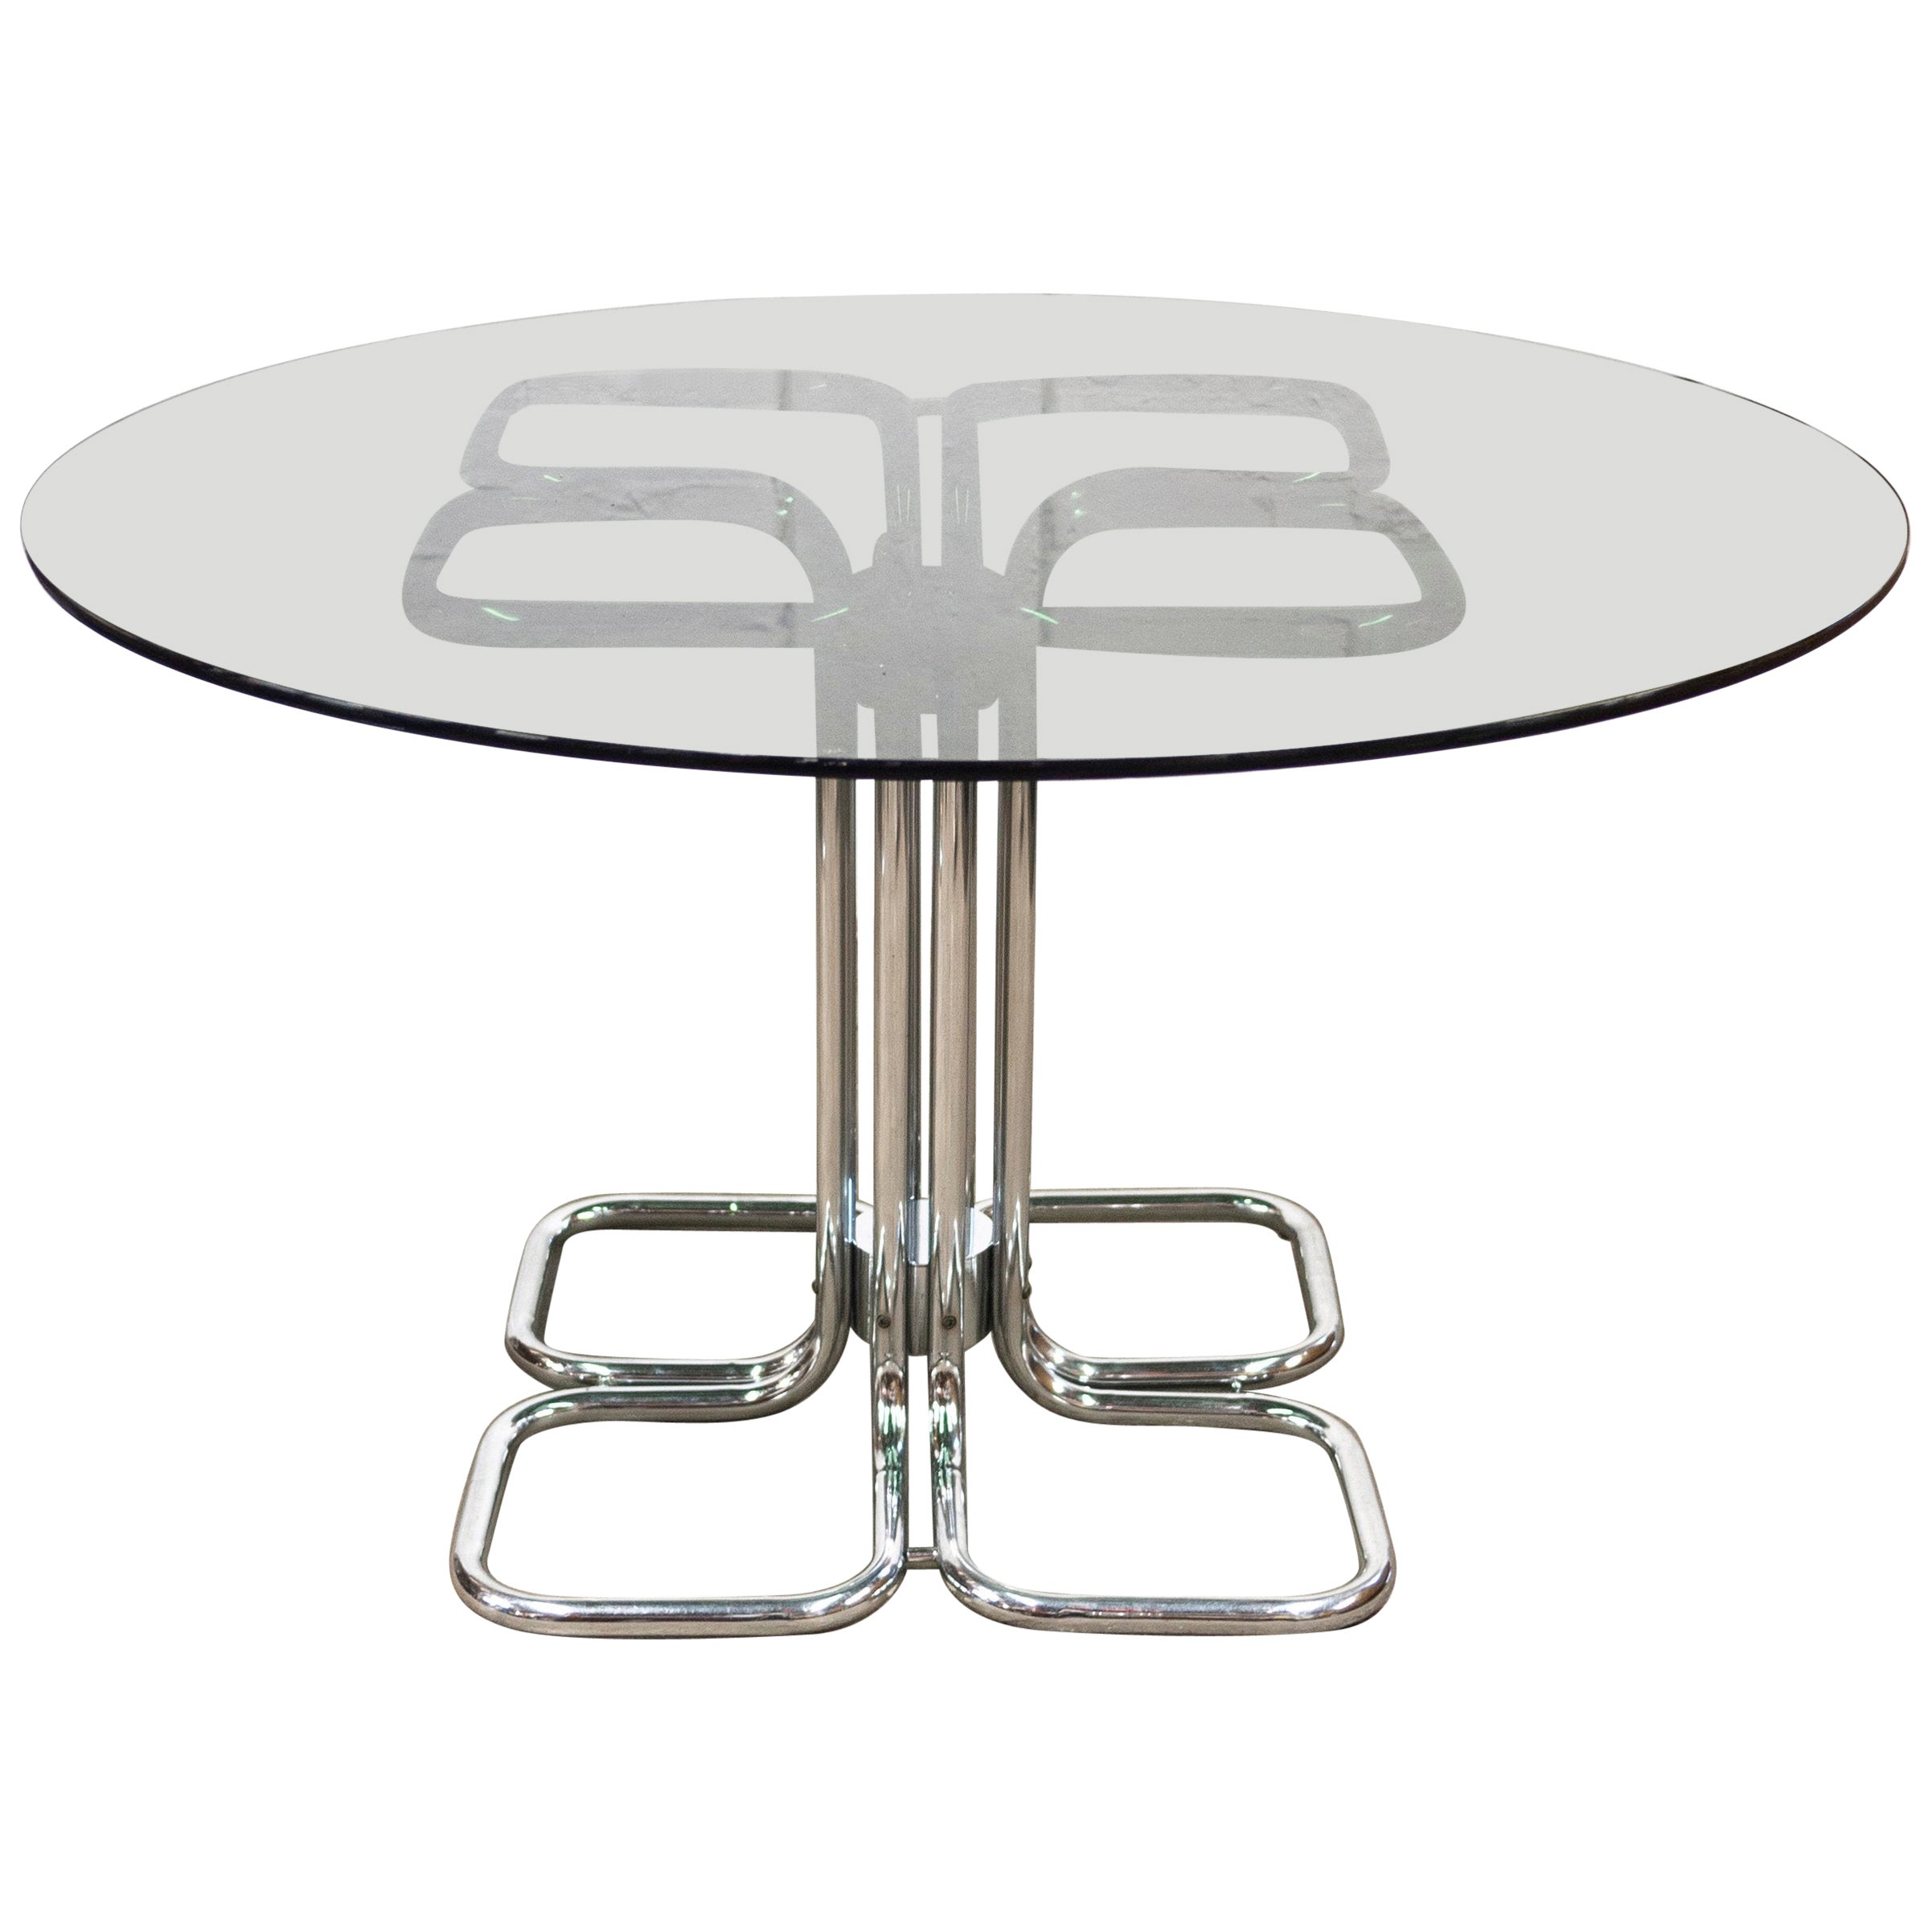 Mid-Century Modern Italian Glass Smoked Top Dining Table by Giotto Stoppino For Sale